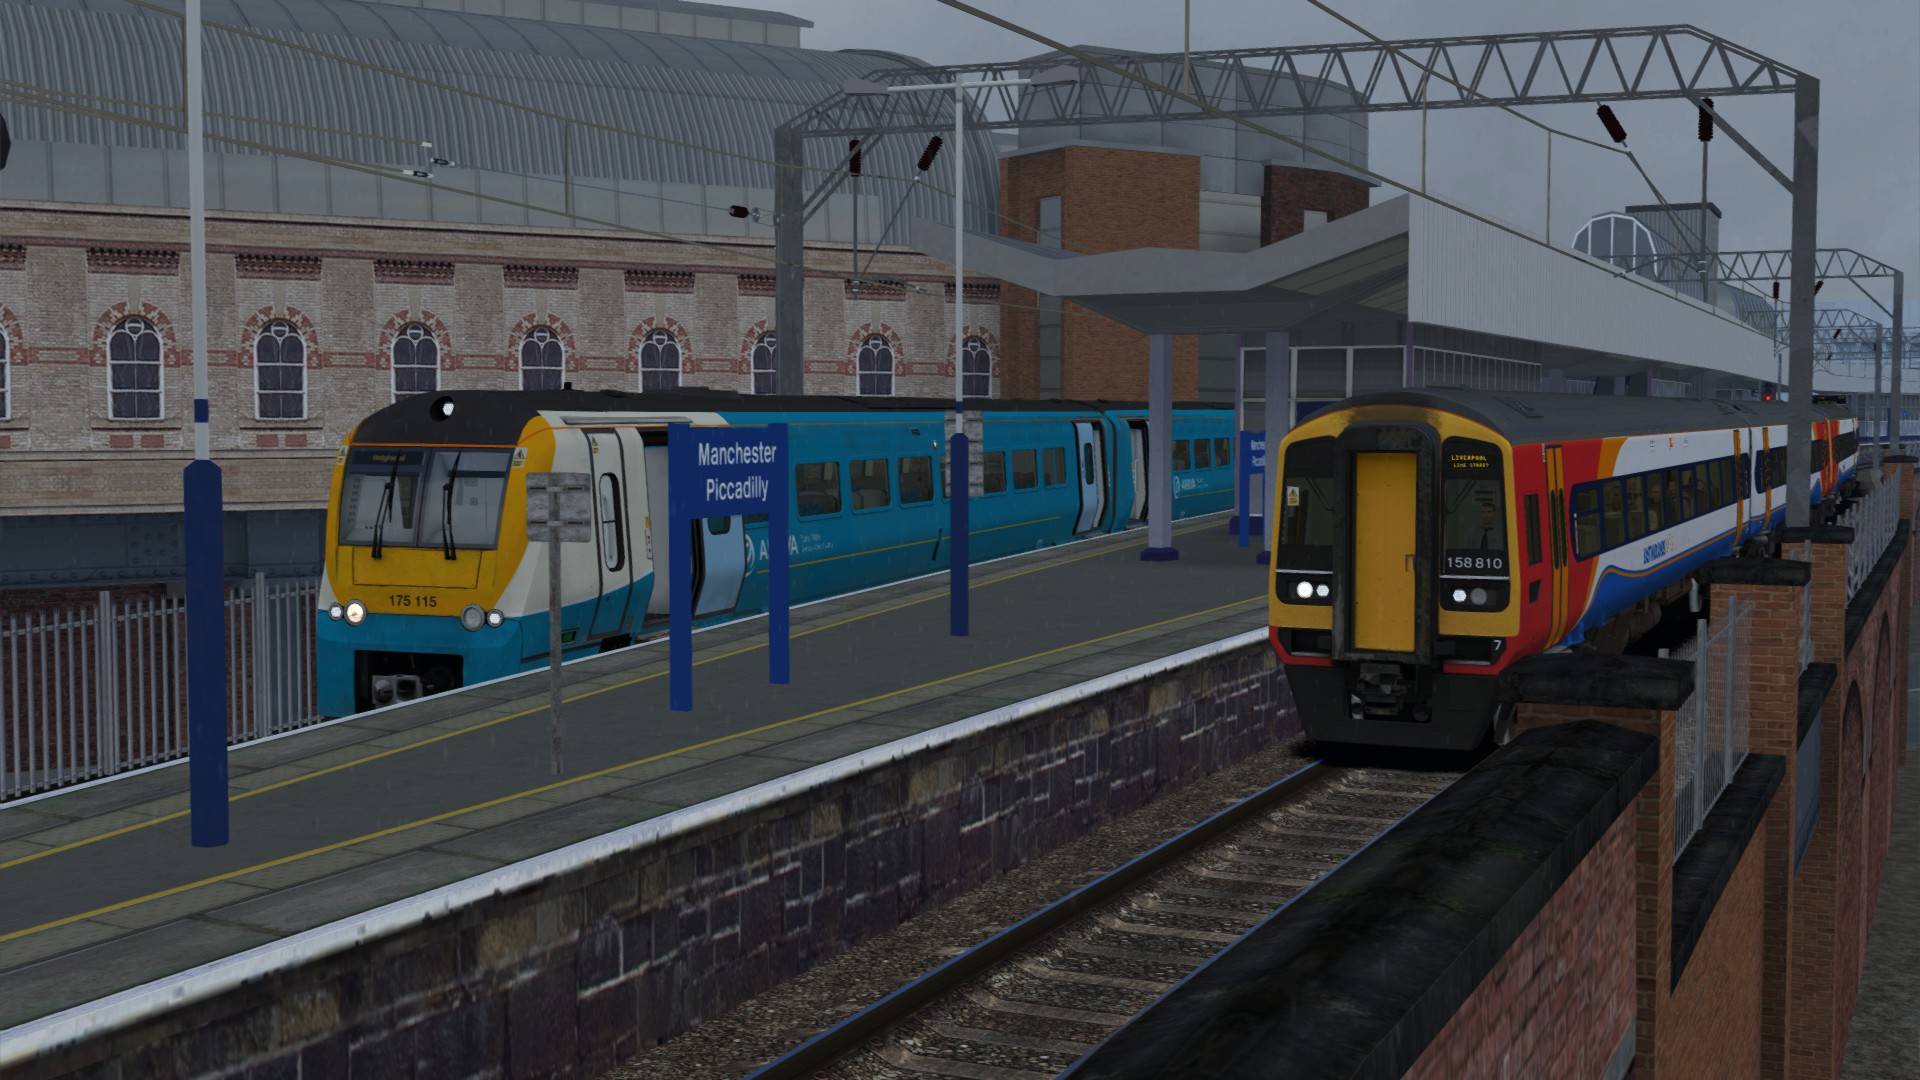 1D32 0750 Manchester Picc to Holyhead